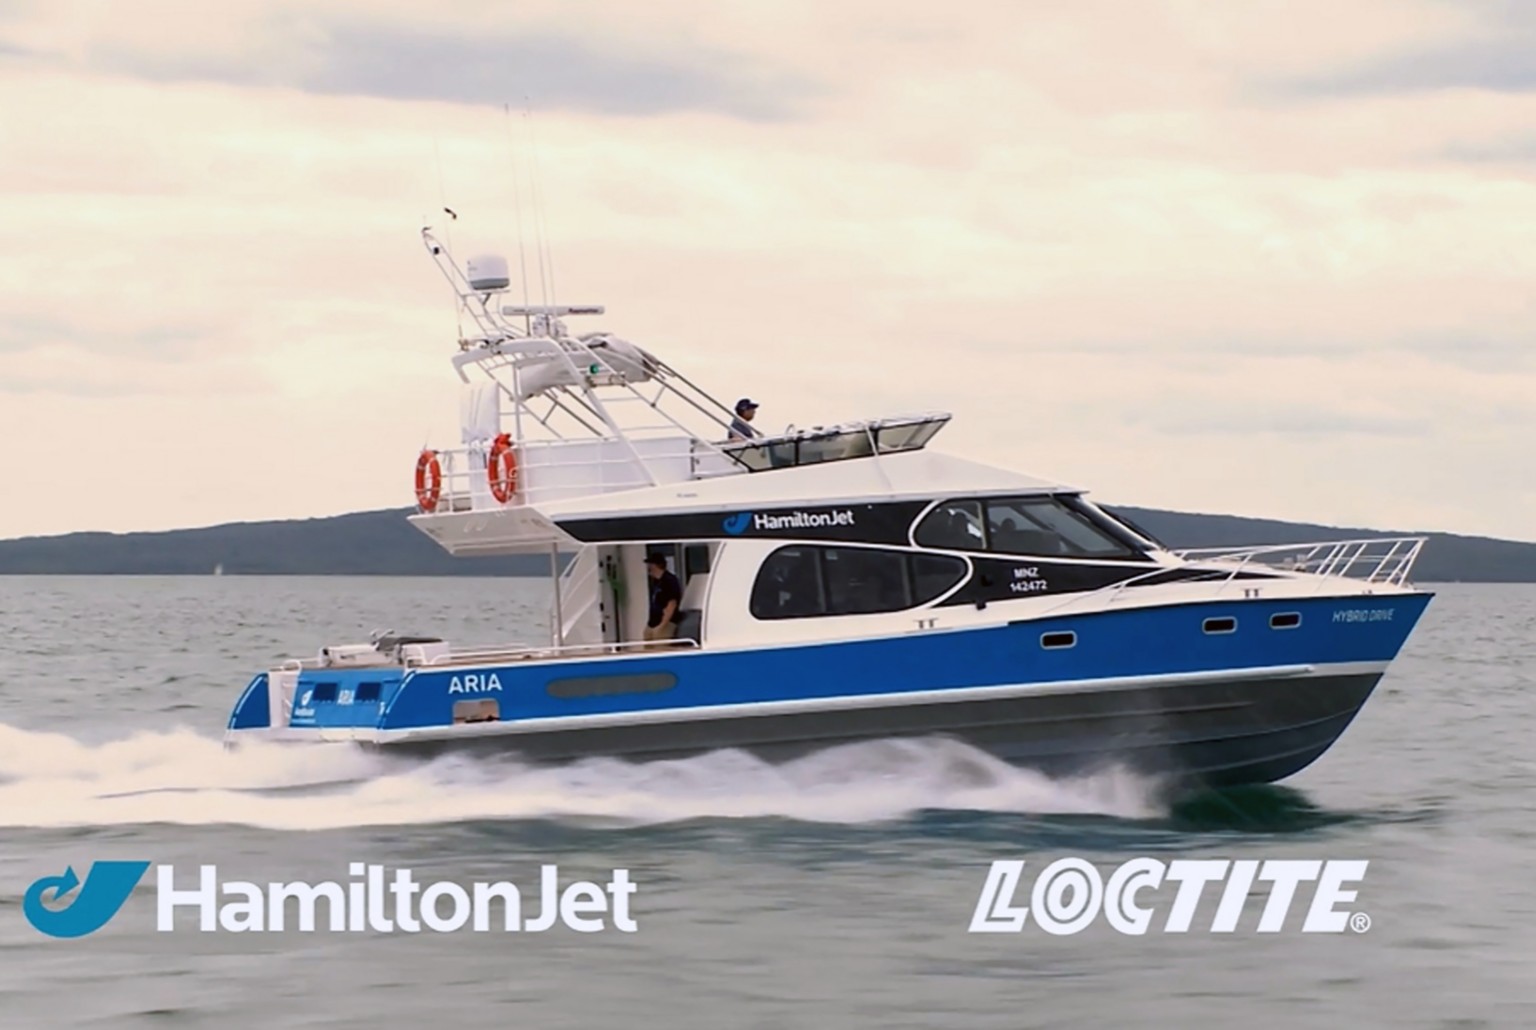 HamiltonJet’s world-class waterjet propulsion systems depend on LOCTITE.